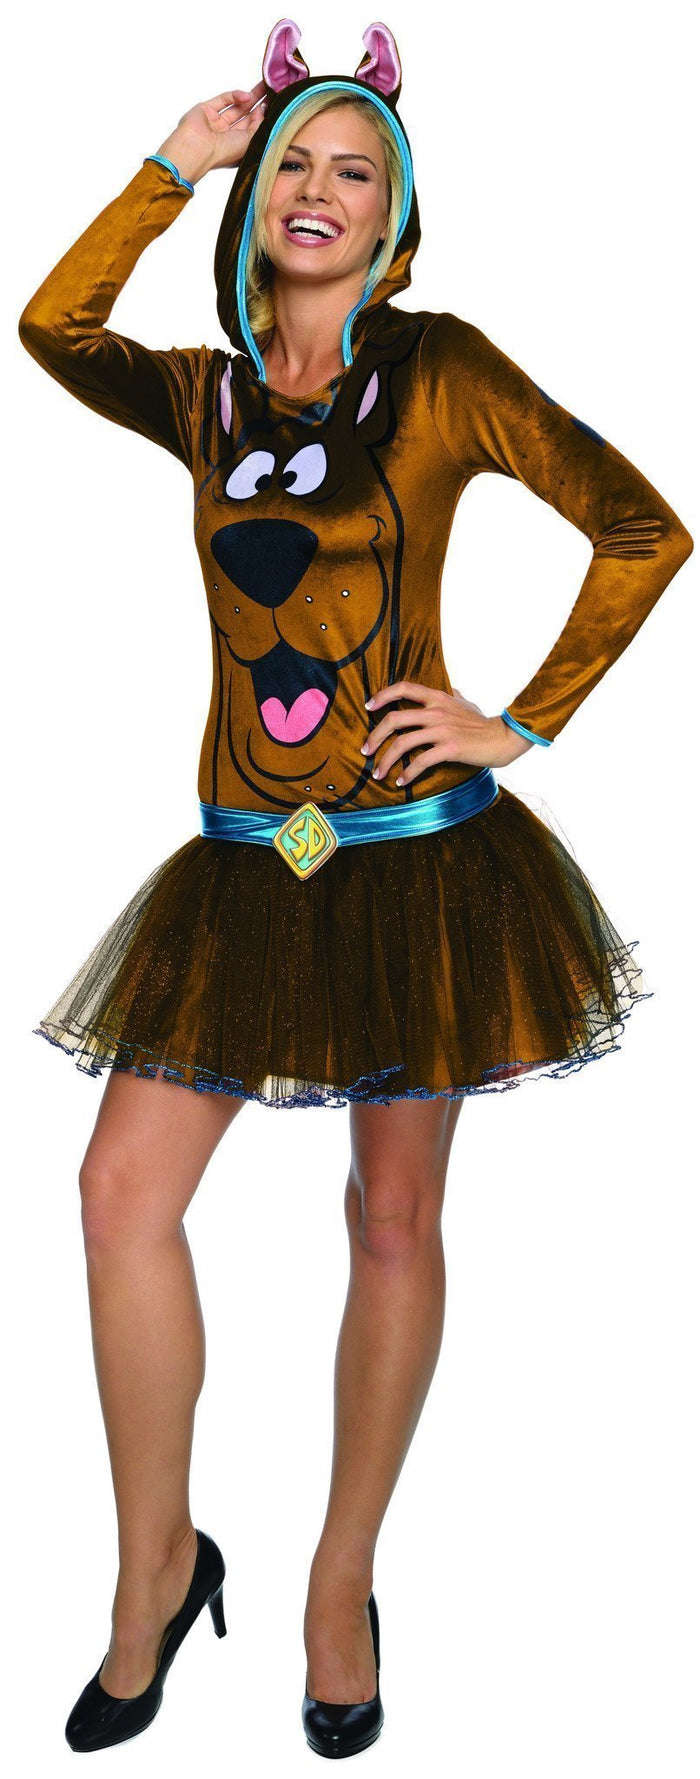 Scooby Doo Hooded Tutu Costume for Adults - Warner Bros Scooby Doo